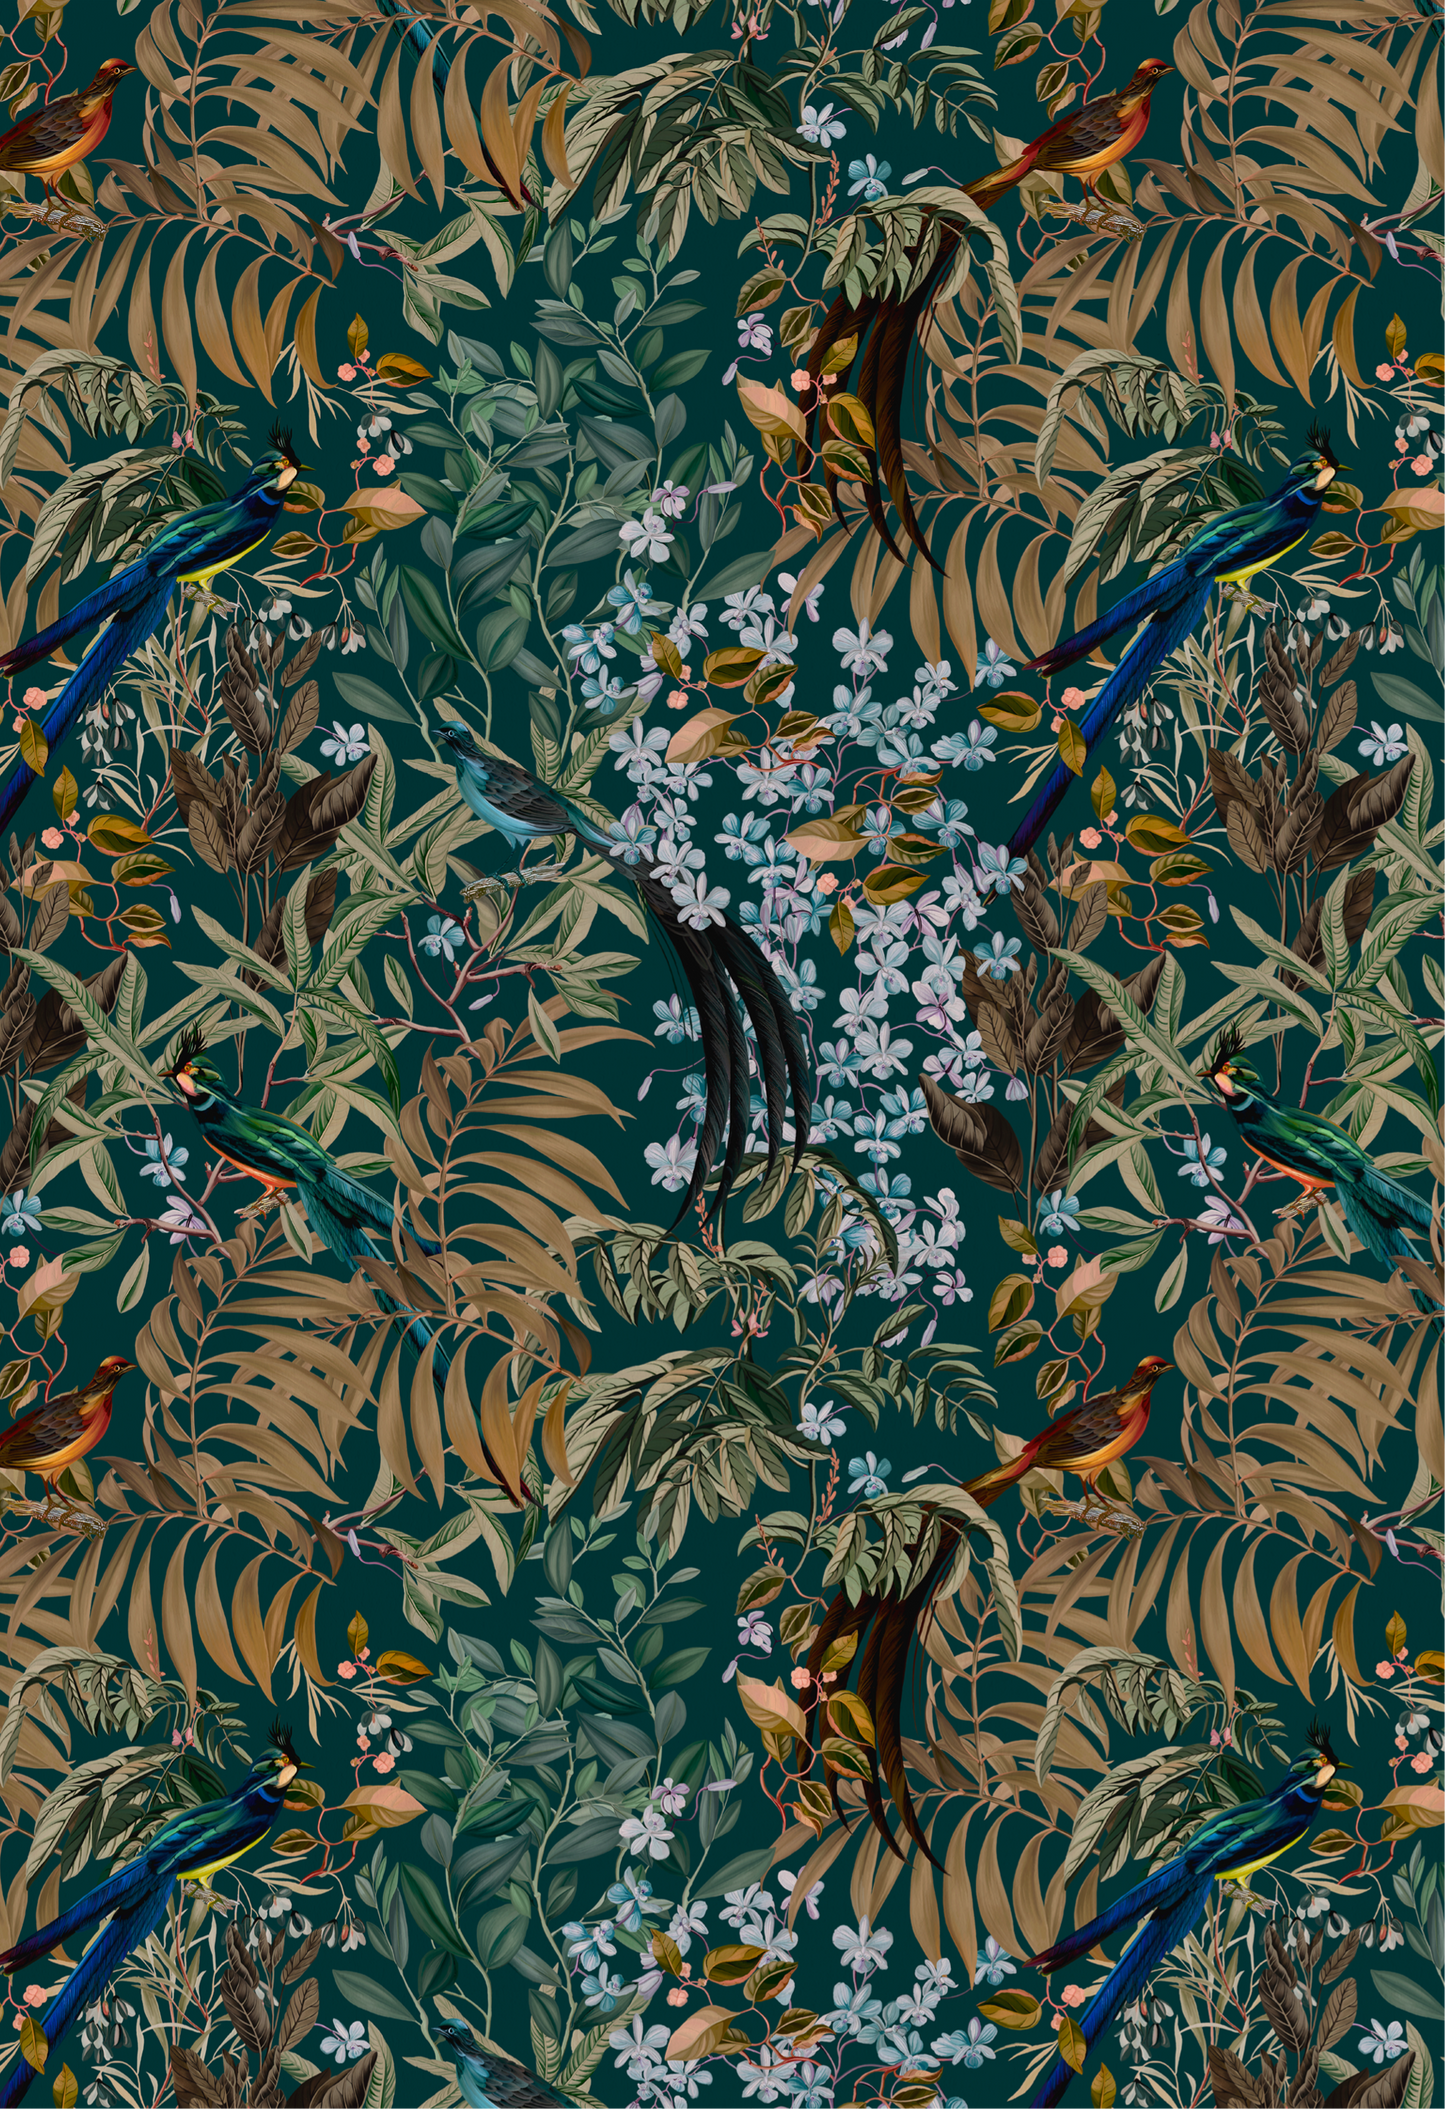 Botanical wallpaper of tropical birds and blue florals in a woodland with golden palms by Deus ex Gardenia of Resplendent Woods Wallpaper in Forest. 